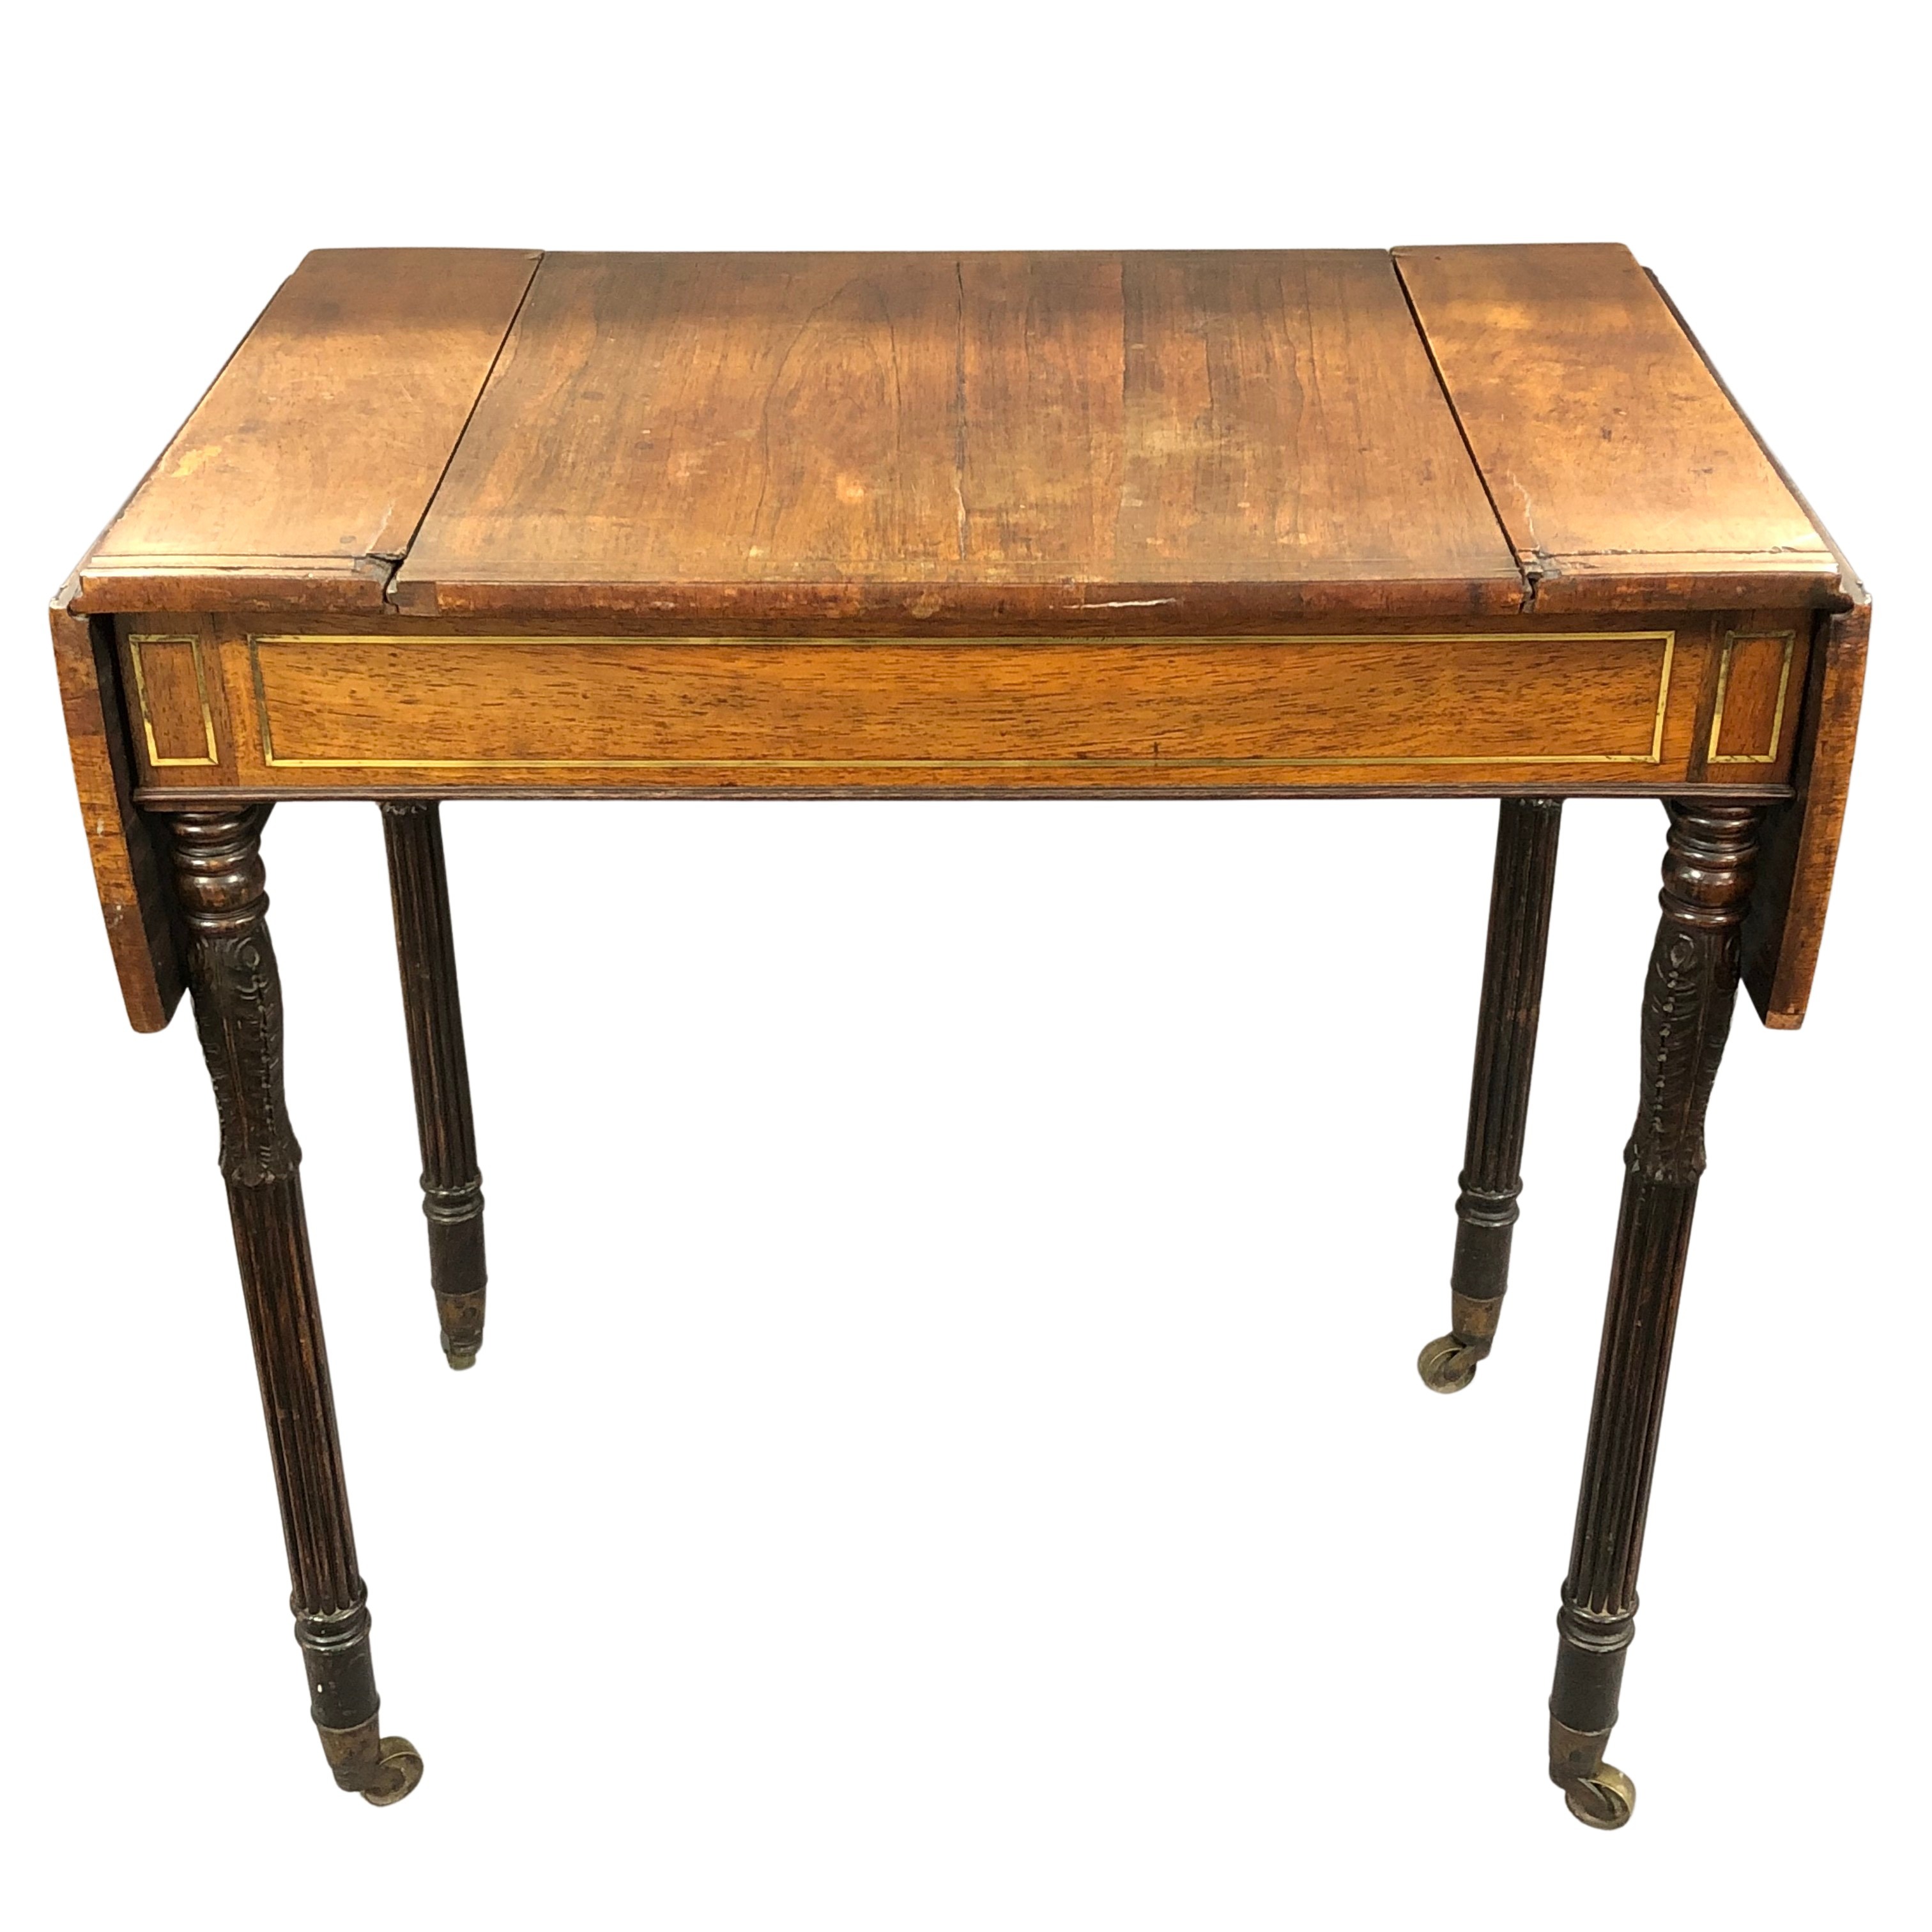 A Regency rosewood games table, inlaid with brass and with drop leaf extensions,